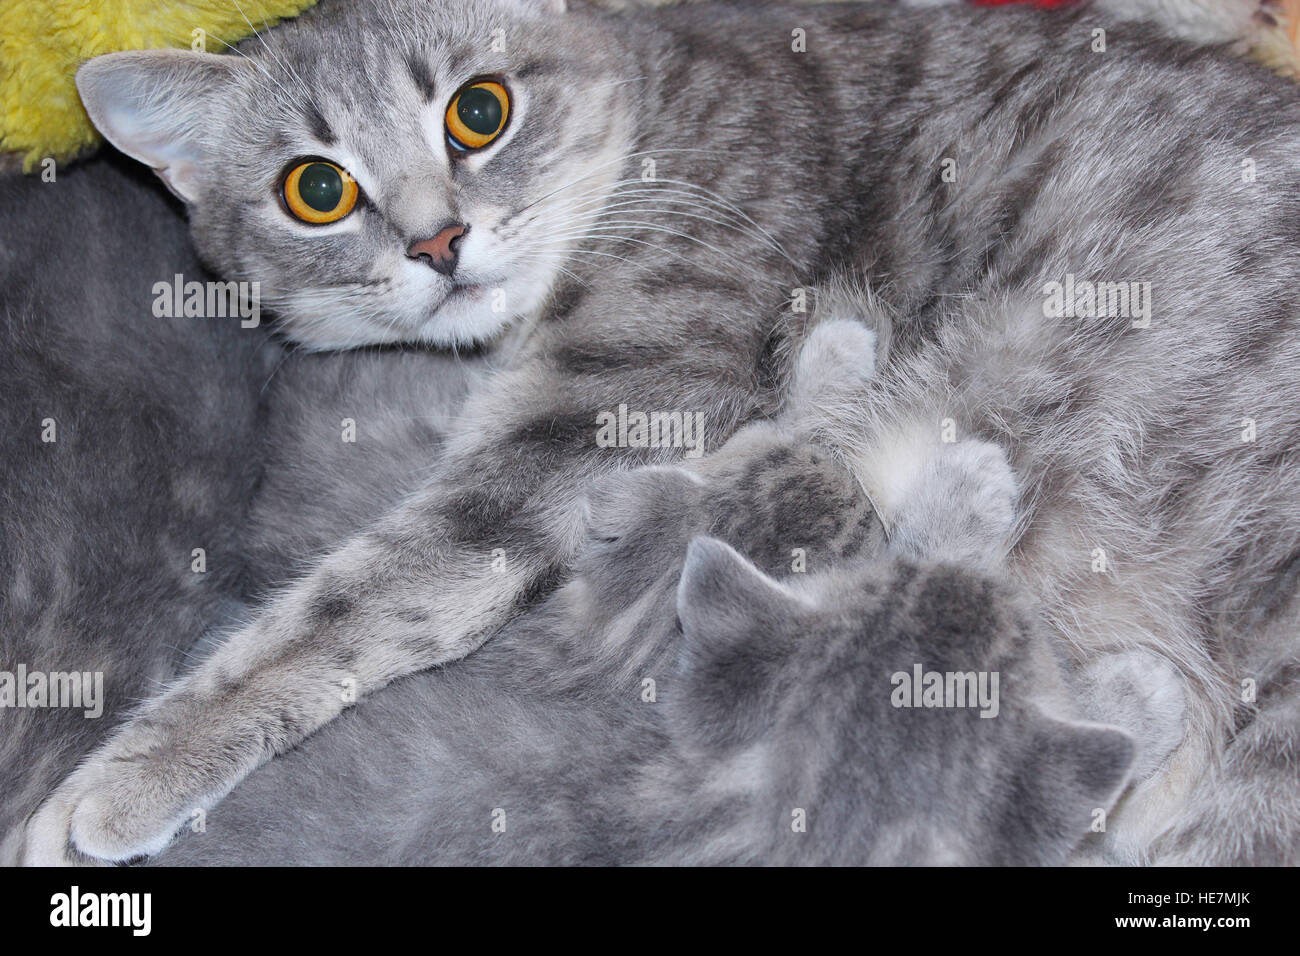 newborn kittens of Scottish Straight with their mother Stock Photo